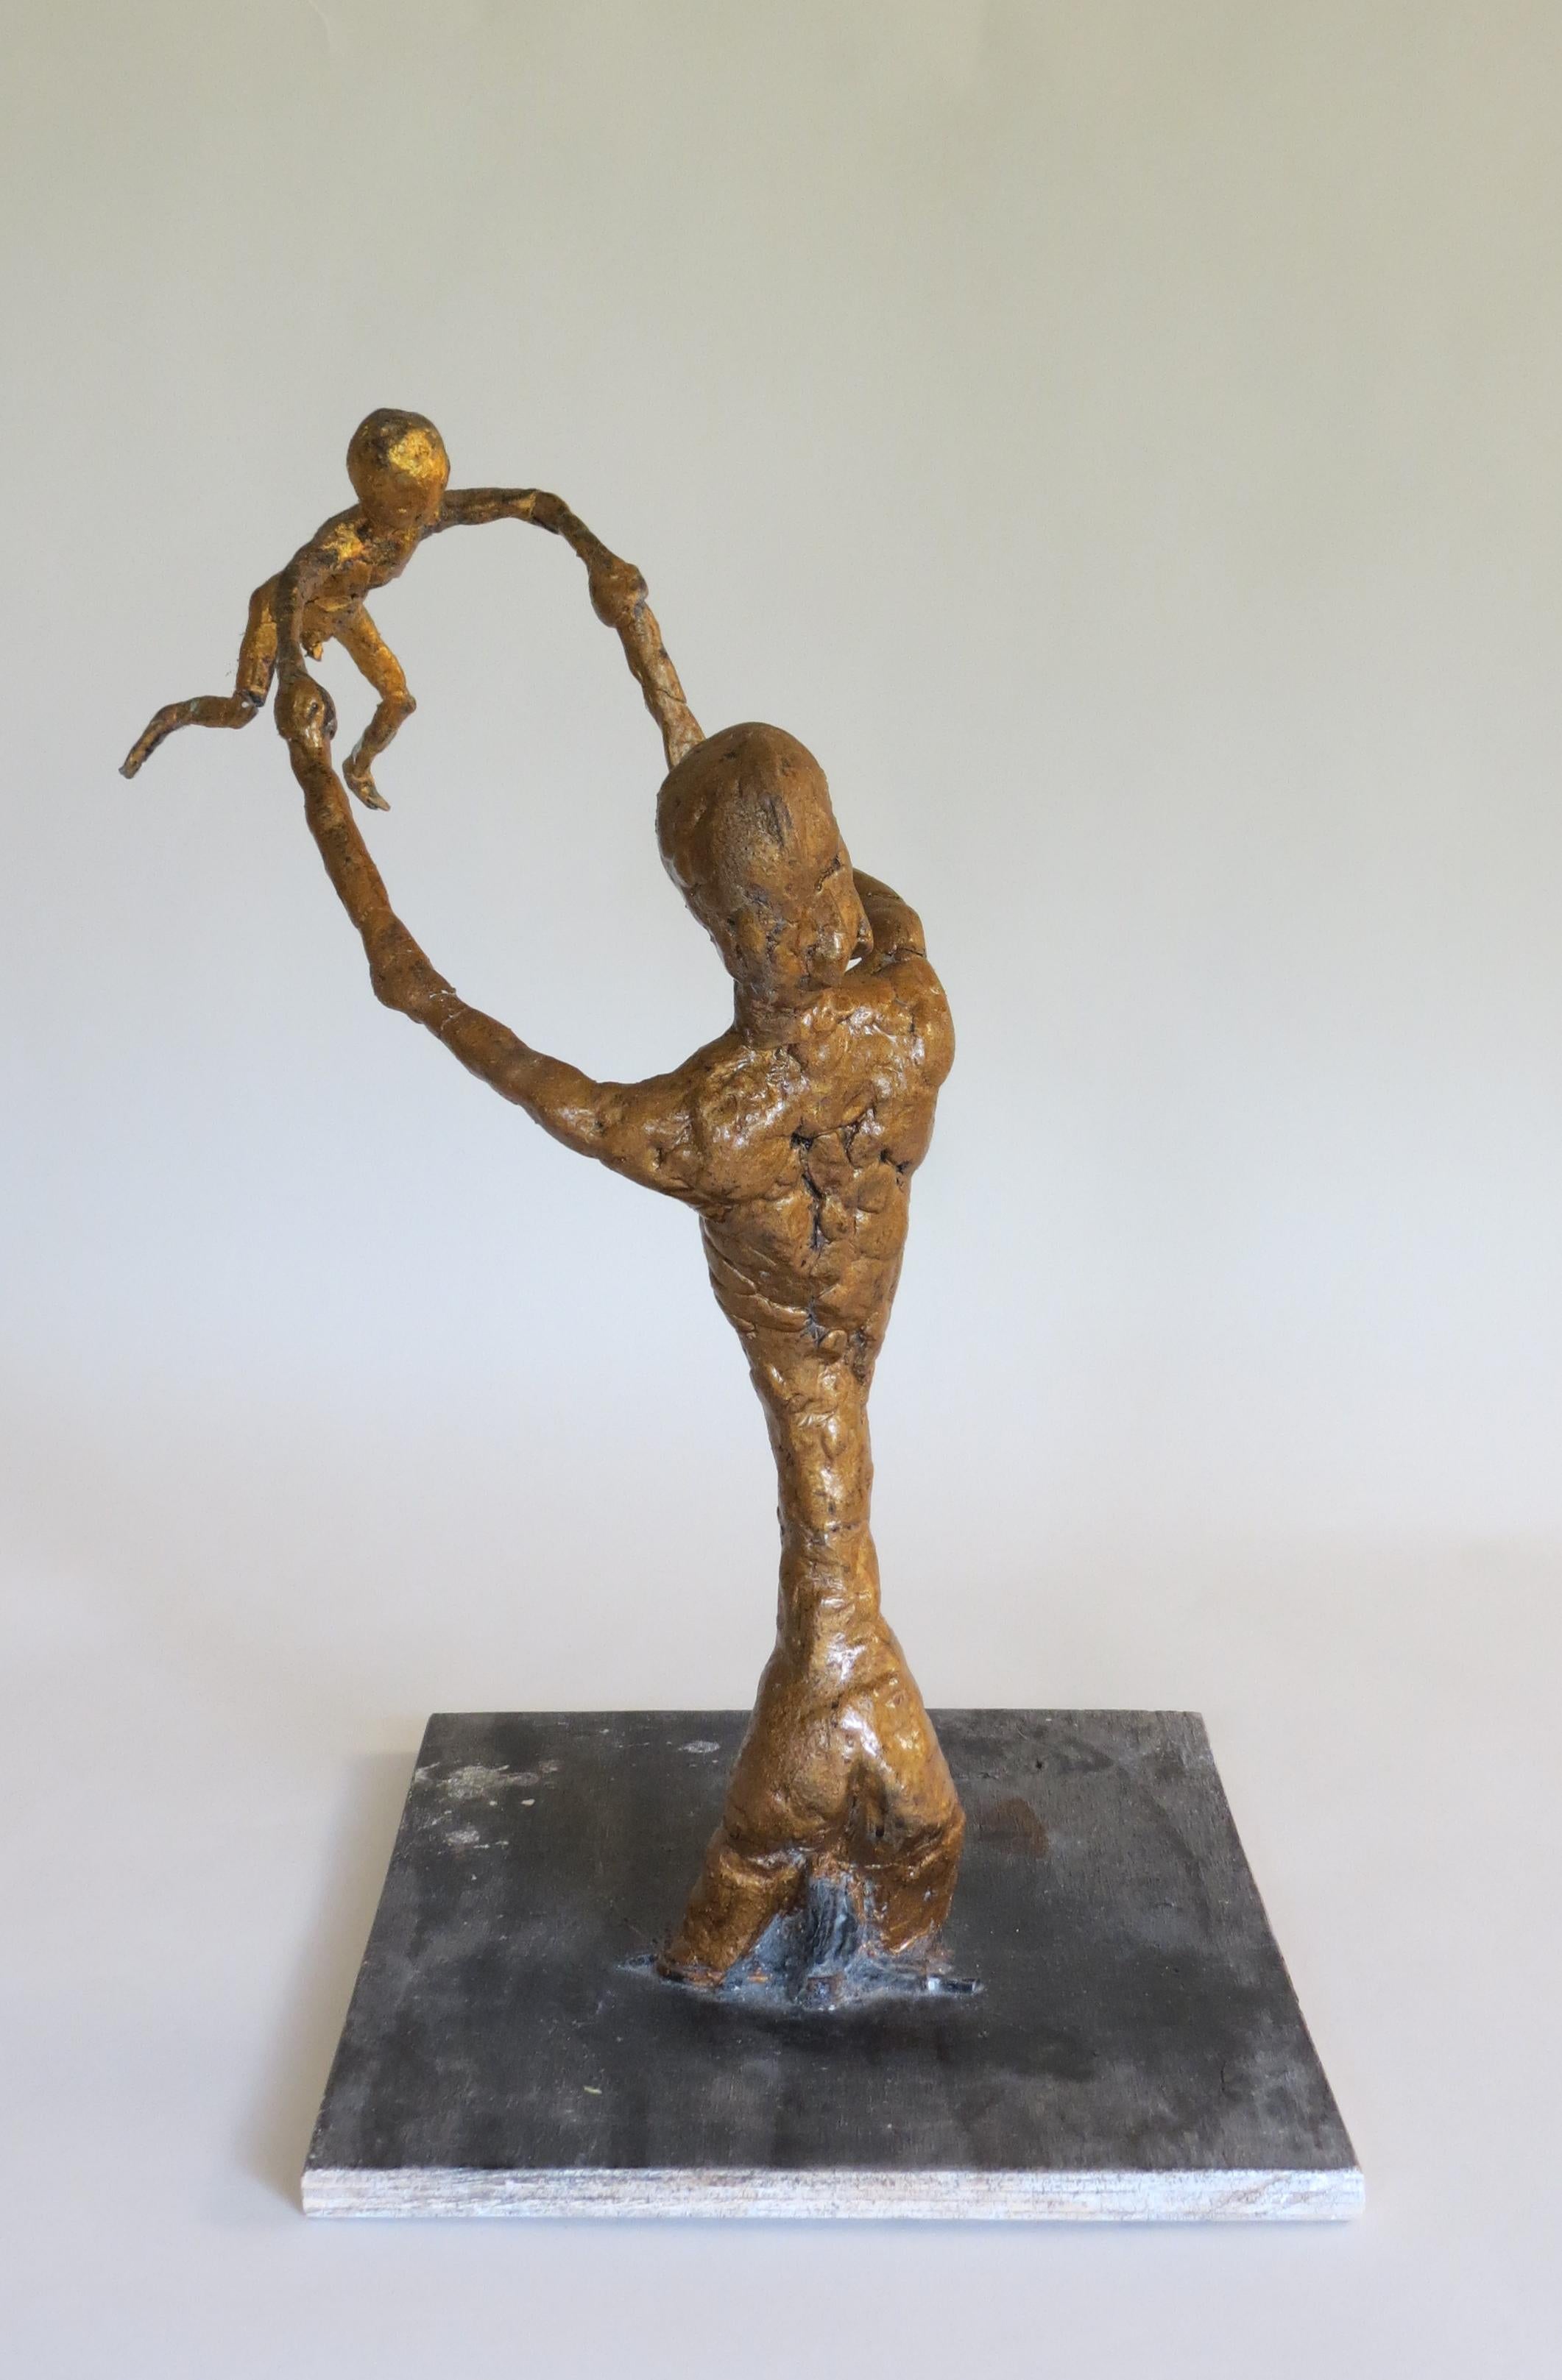 A beautiful and unique plaster maquette of mother and boy child. Hand produced by Bill Young, year 2000.

A very expressive piece. 

Some loss of paint to the sculpture and marks to the board, these occurred during the sculpting